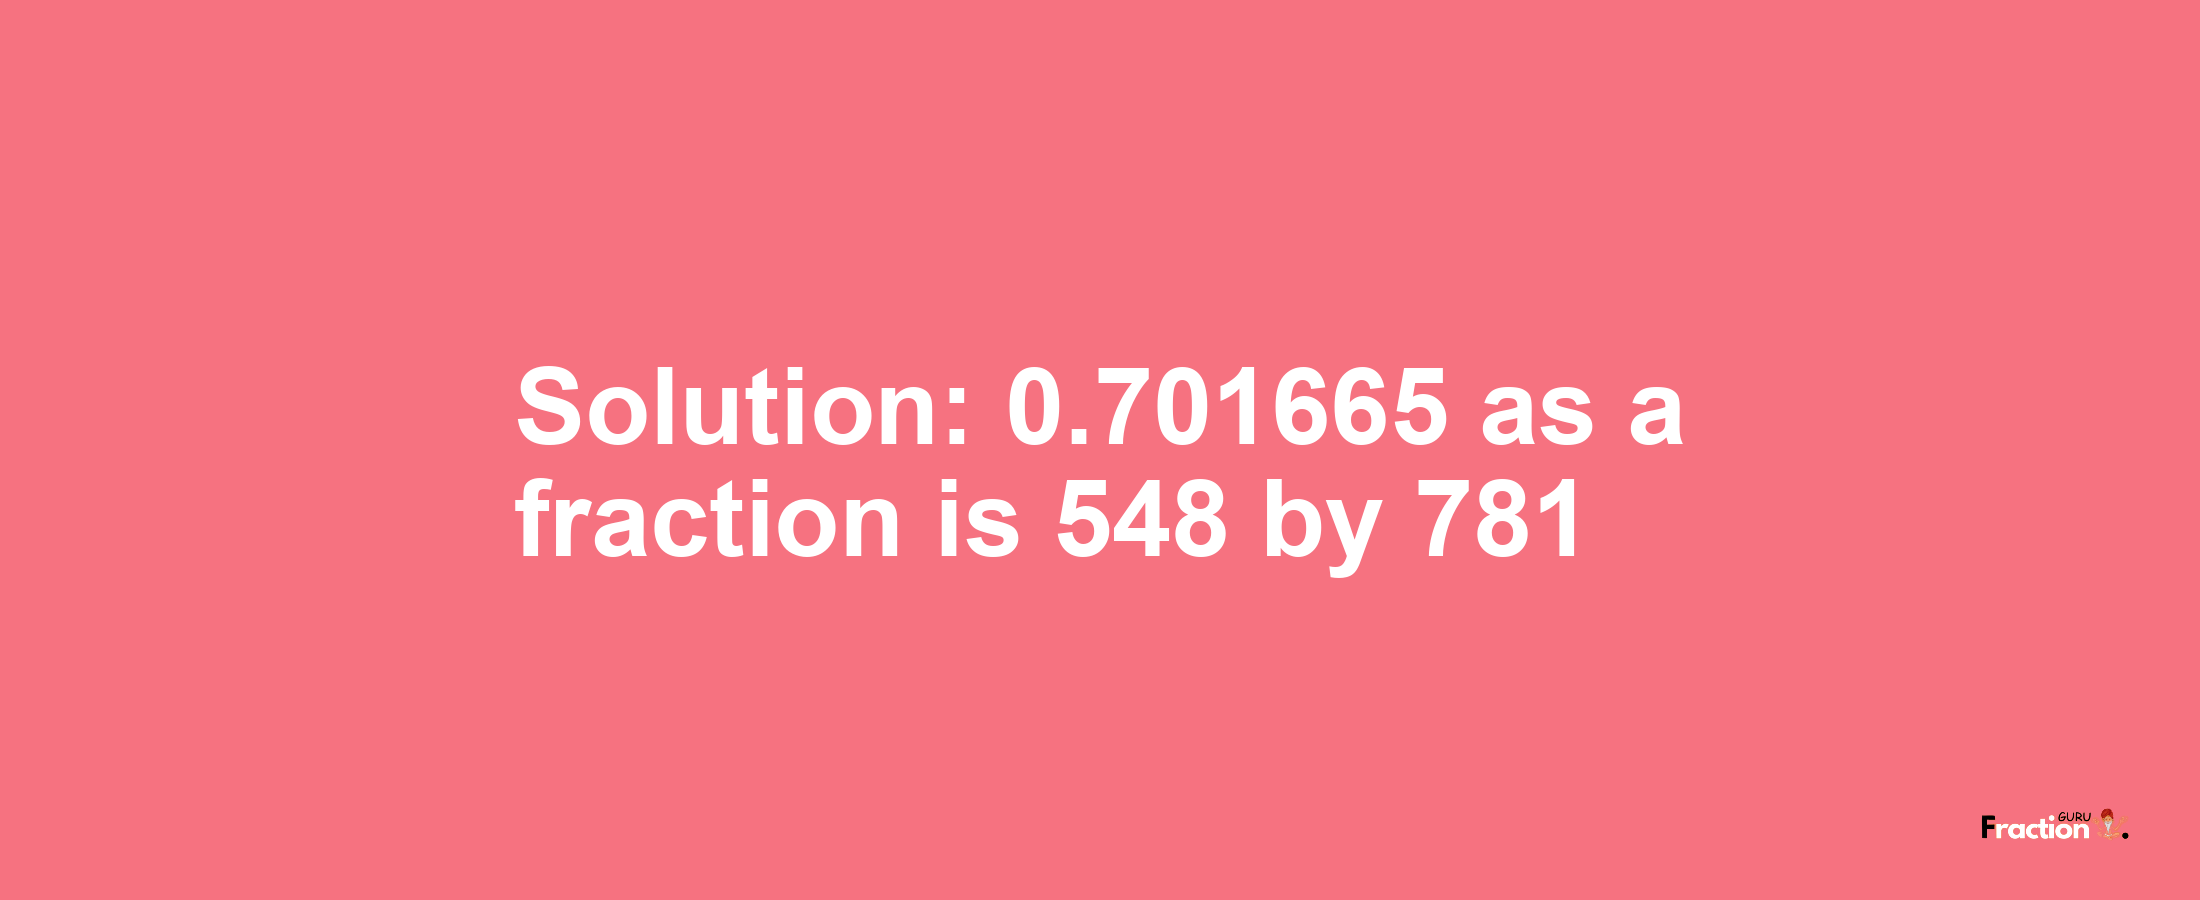 Solution:0.701665 as a fraction is 548/781